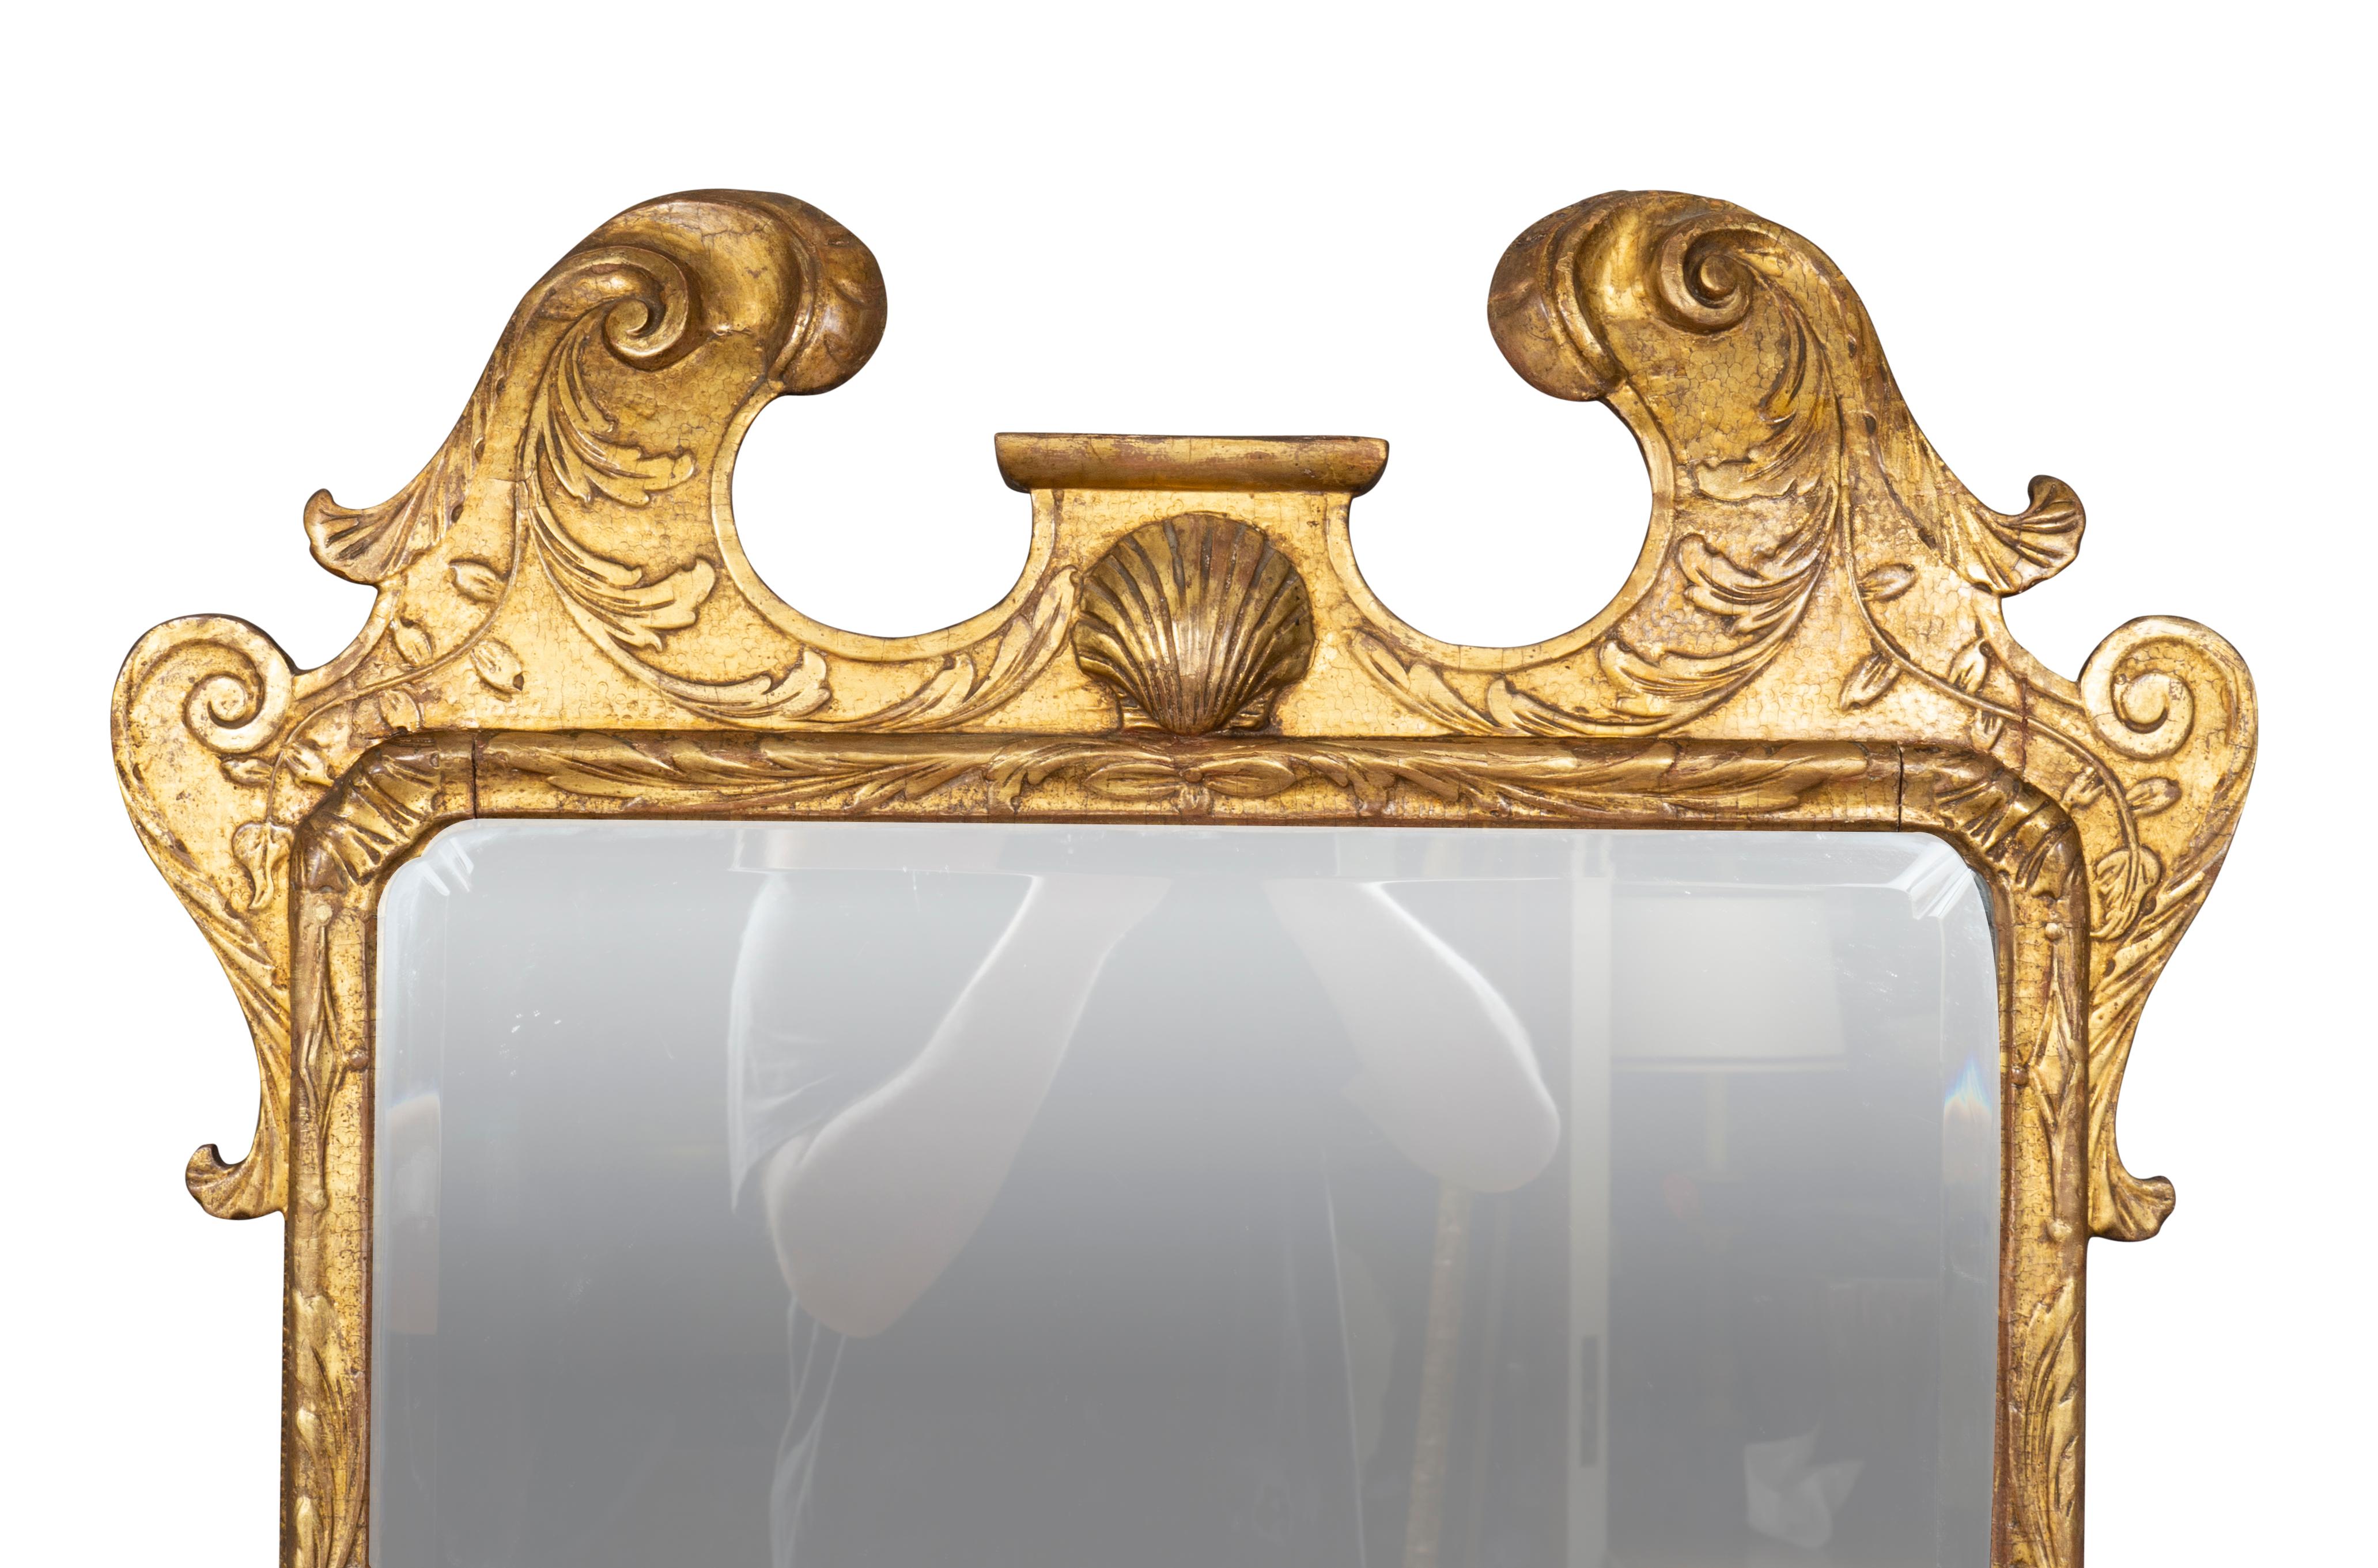 With original gilding. Broken arch pediment with central shell carving over a beveled mirror plate set within a frame with carved shaped corners , backplates that once held candle arms.